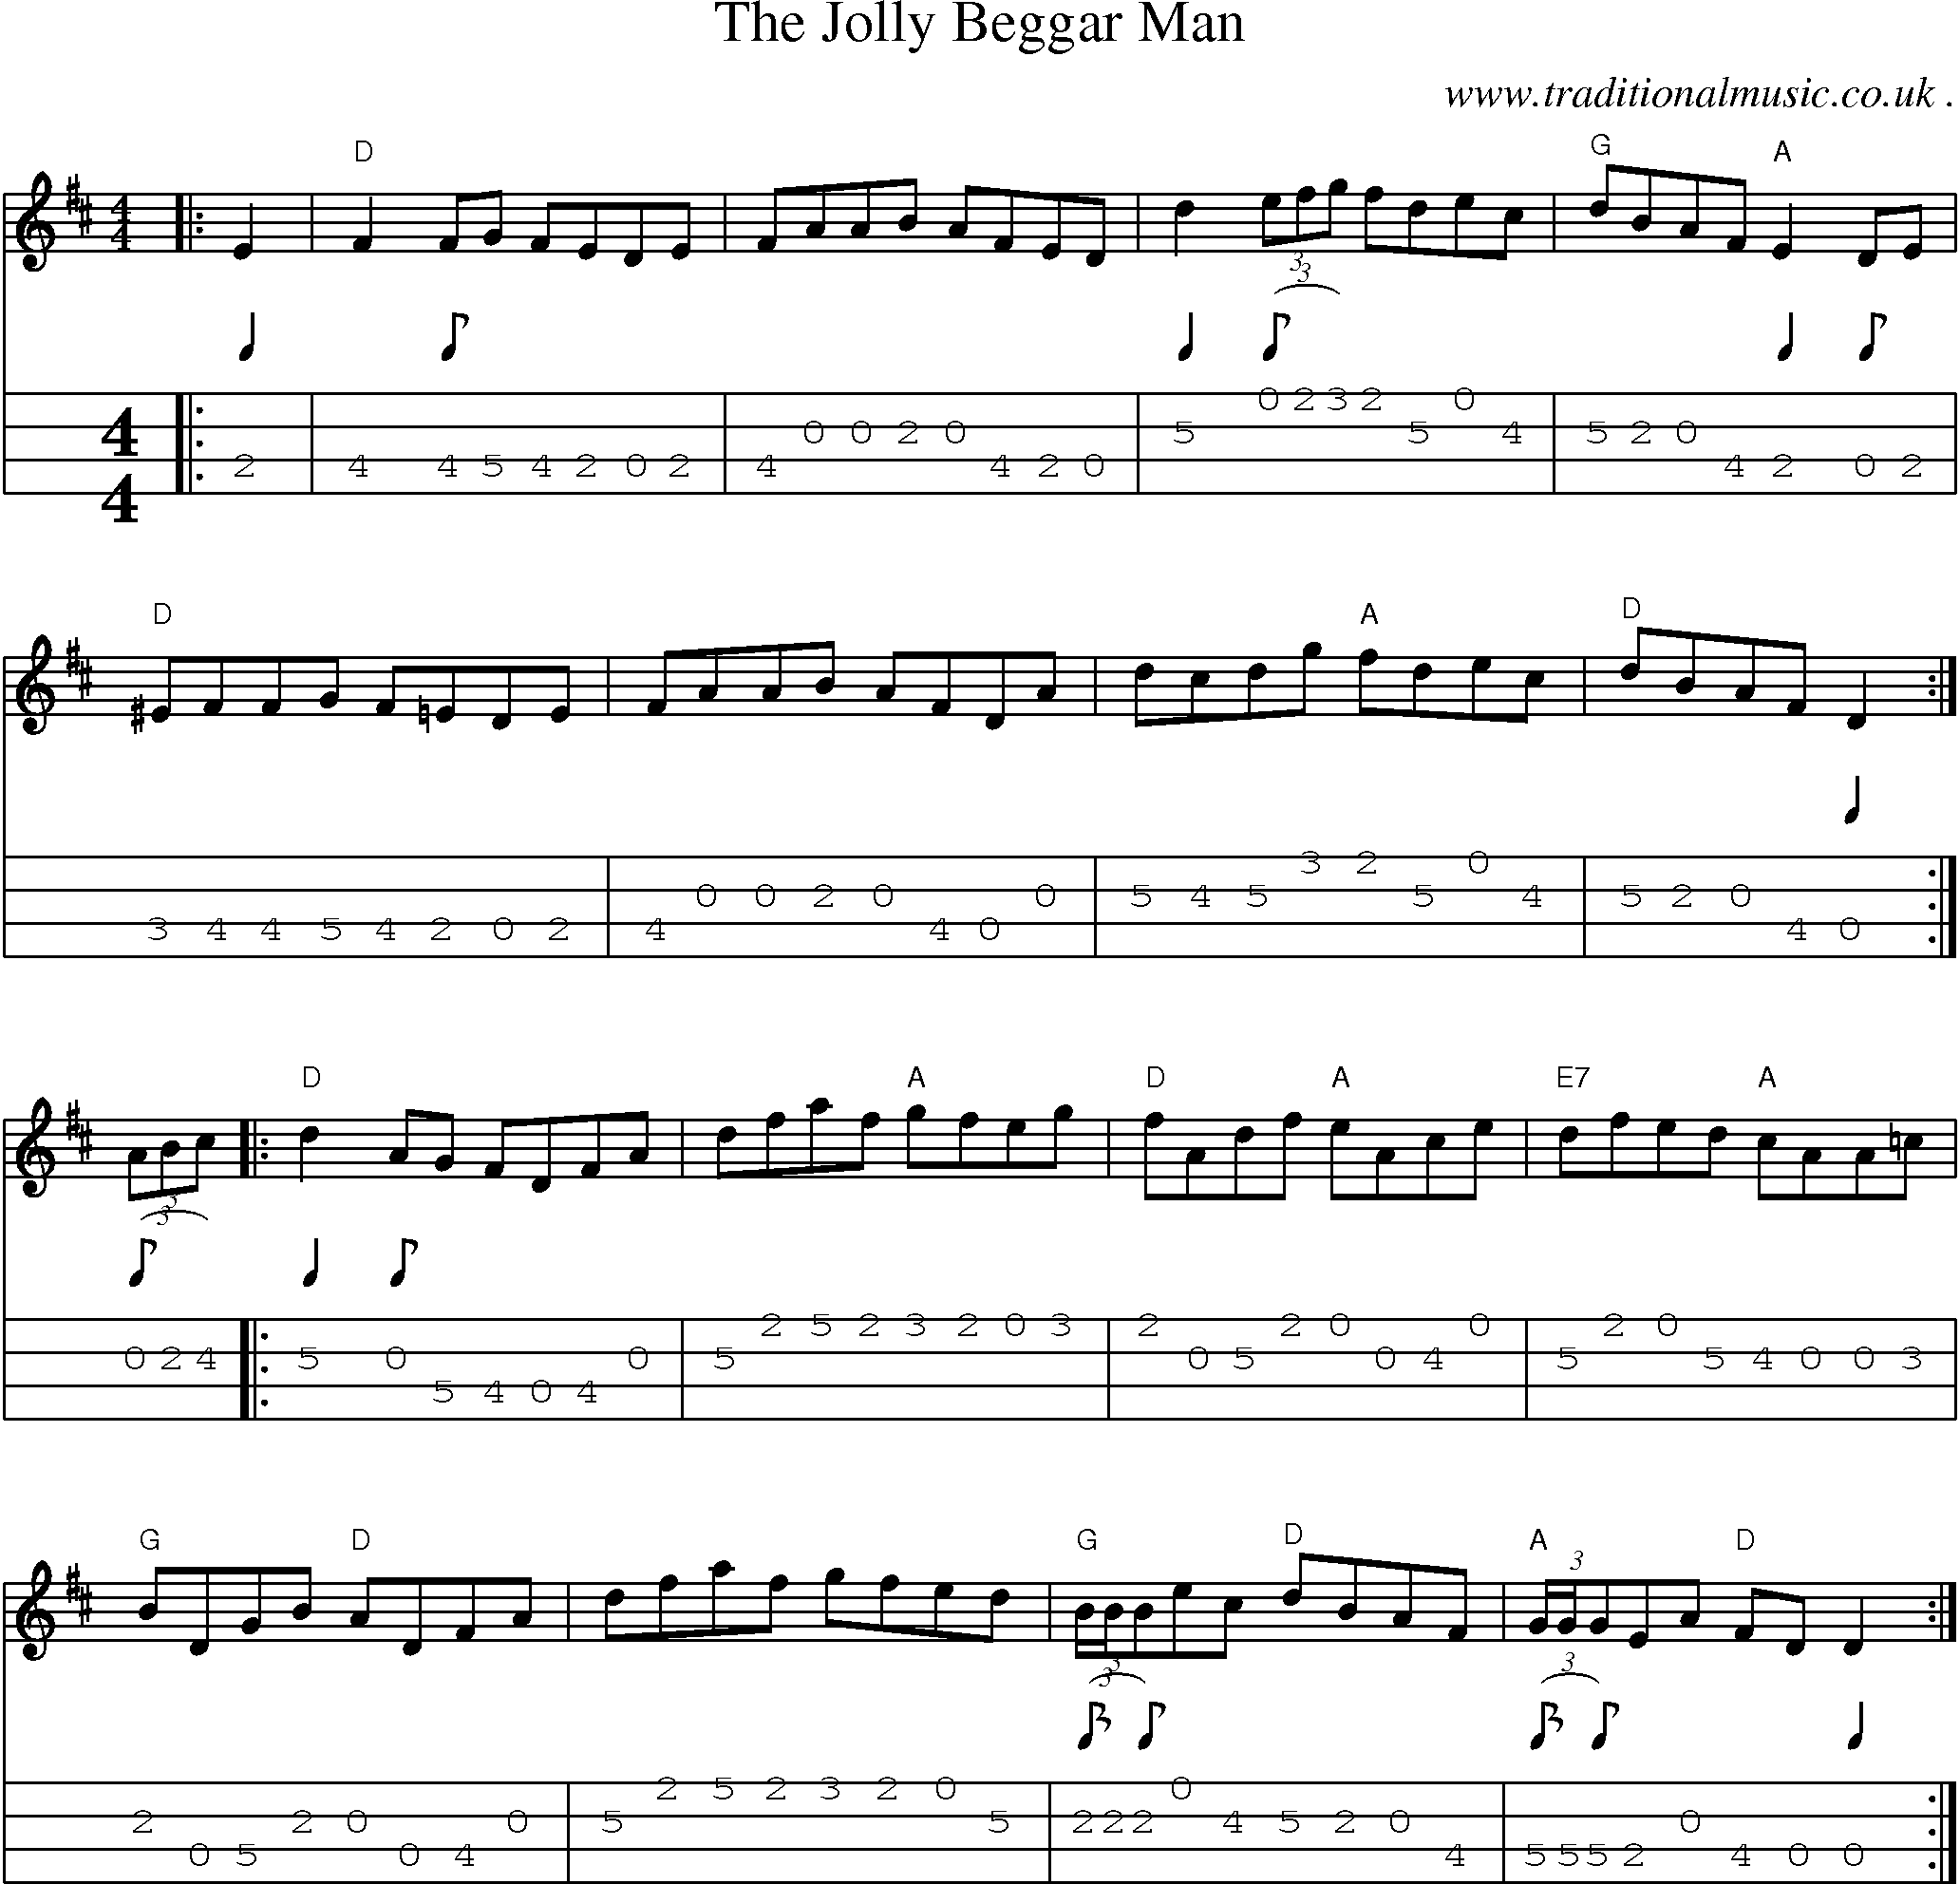 Music Score and Guitar Tabs for The Jolly Beggar Man